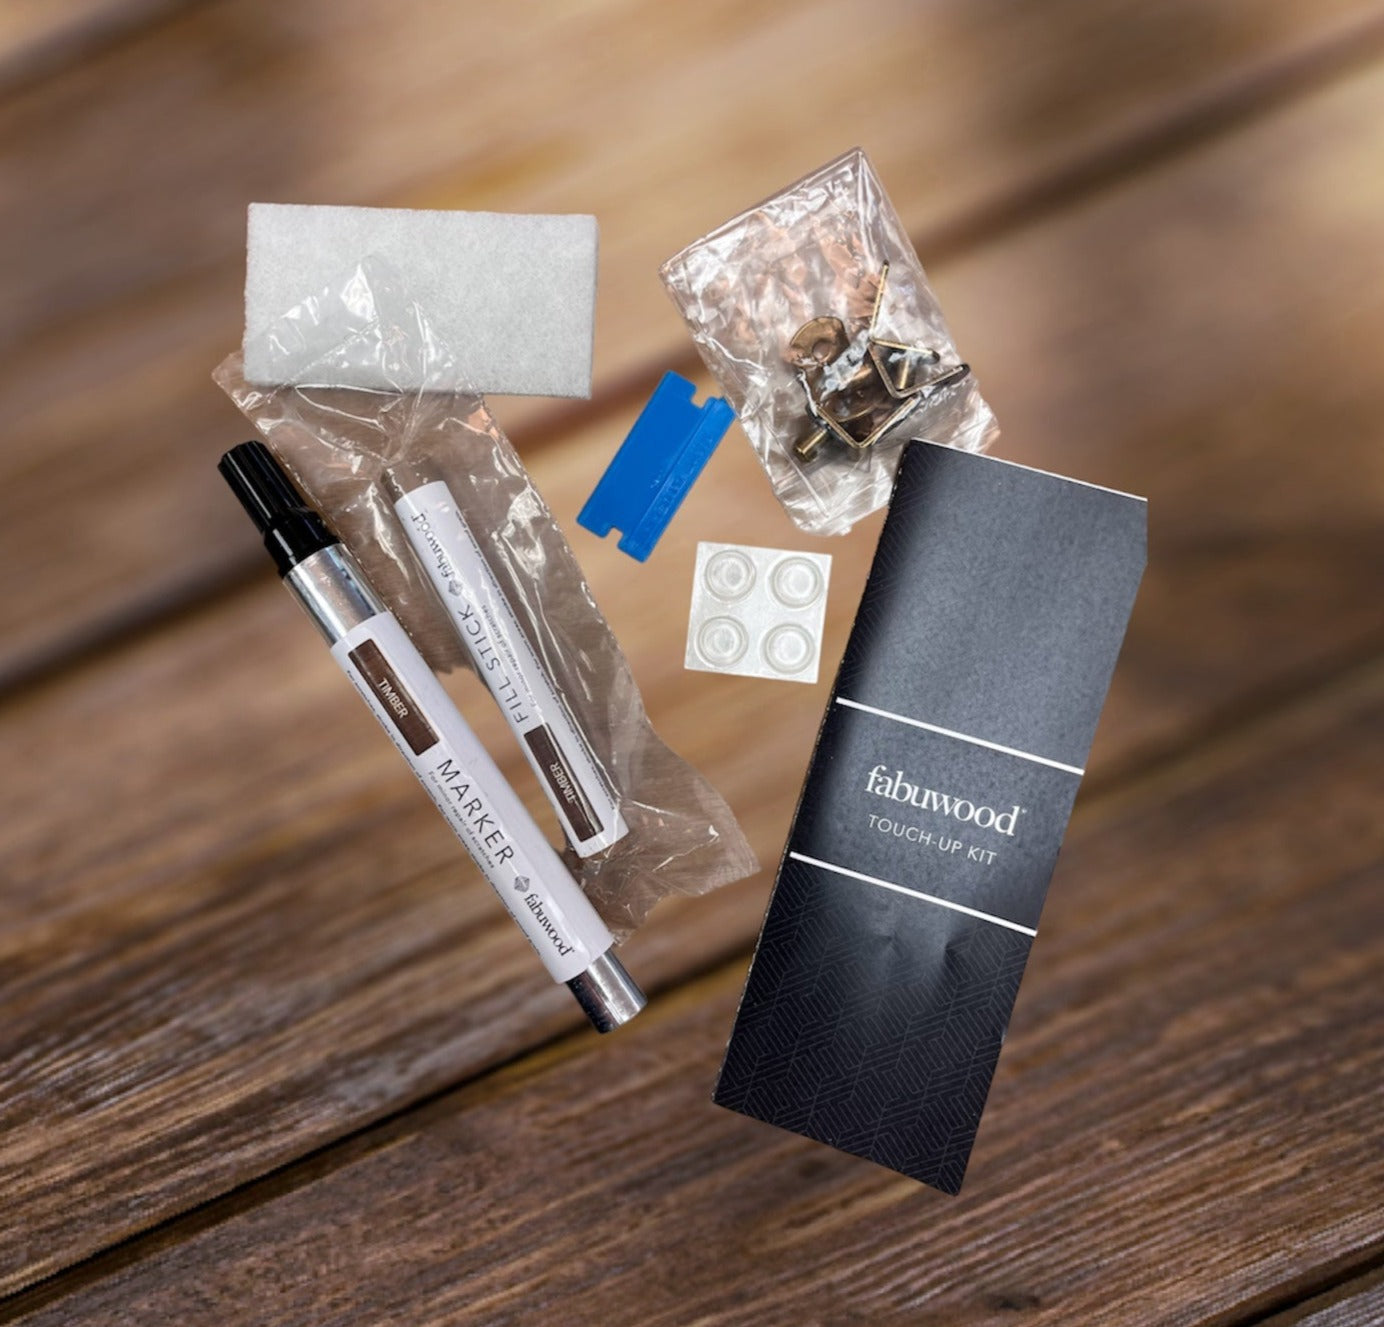 What comes included in a Fabuwood touch up kit.